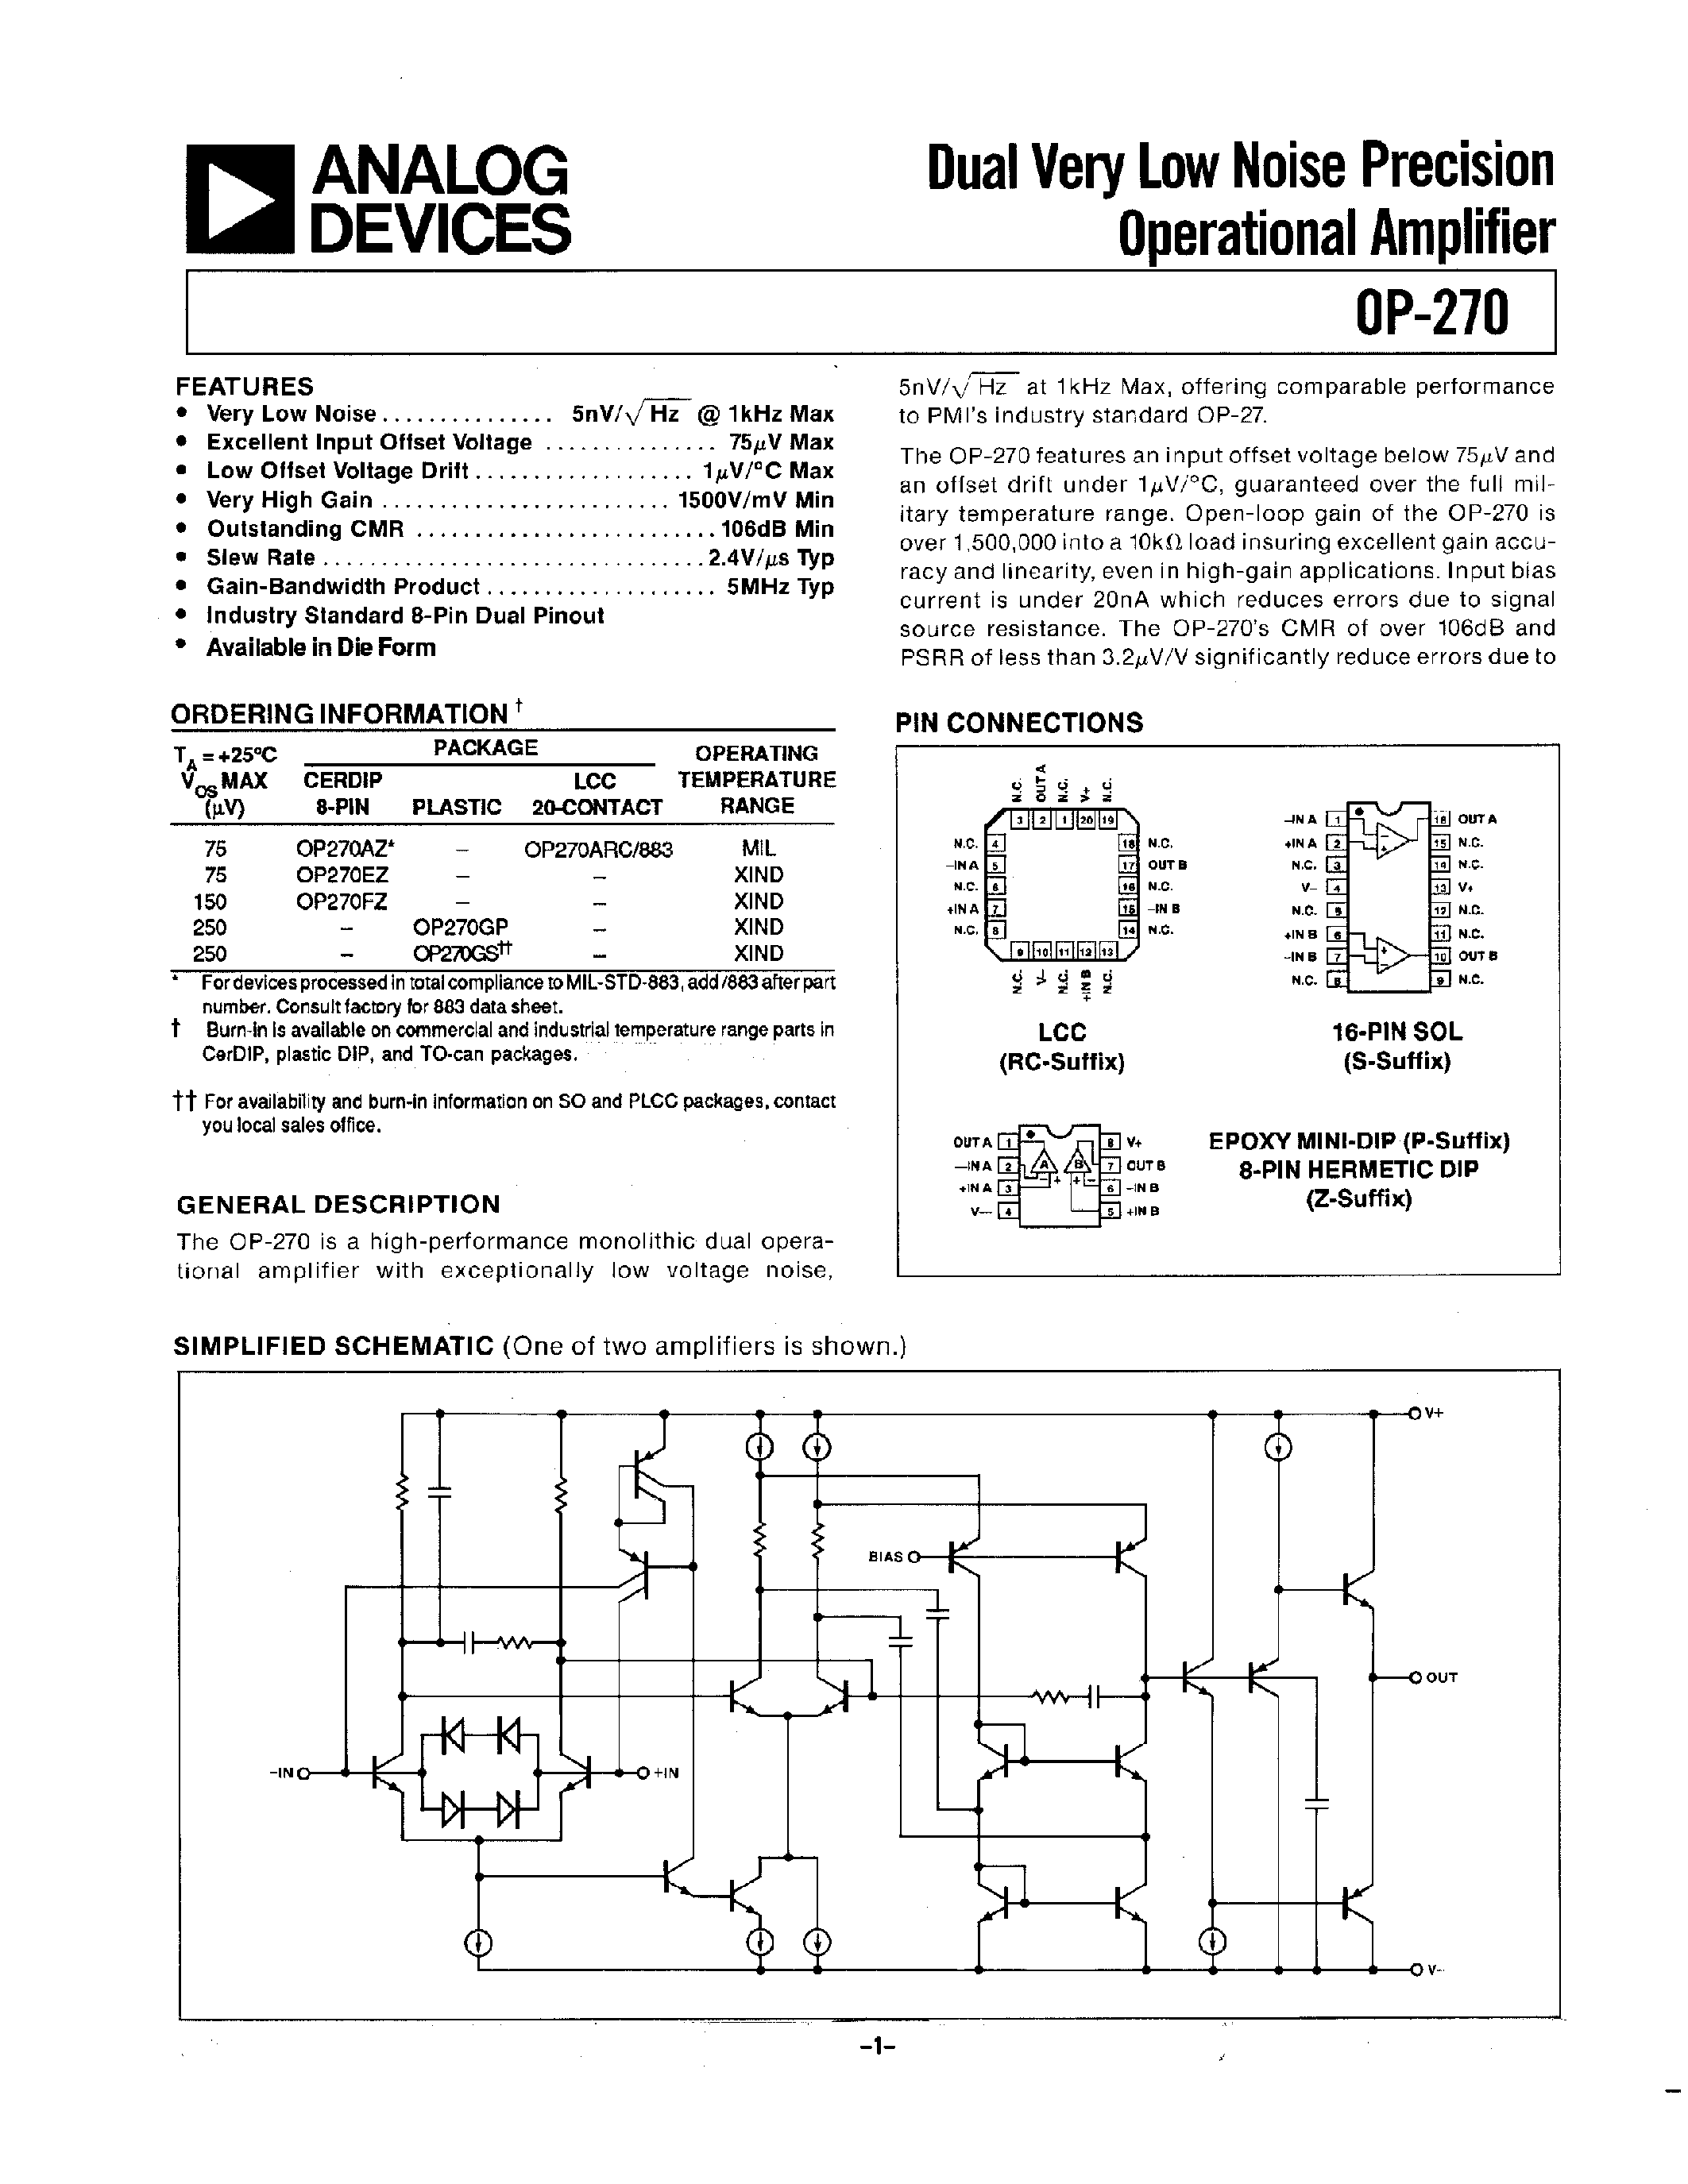 Даташит OP270 - DUAL VERY LOW NOISE PRECISION OPERATIONAL AMPLIFIER страница 1